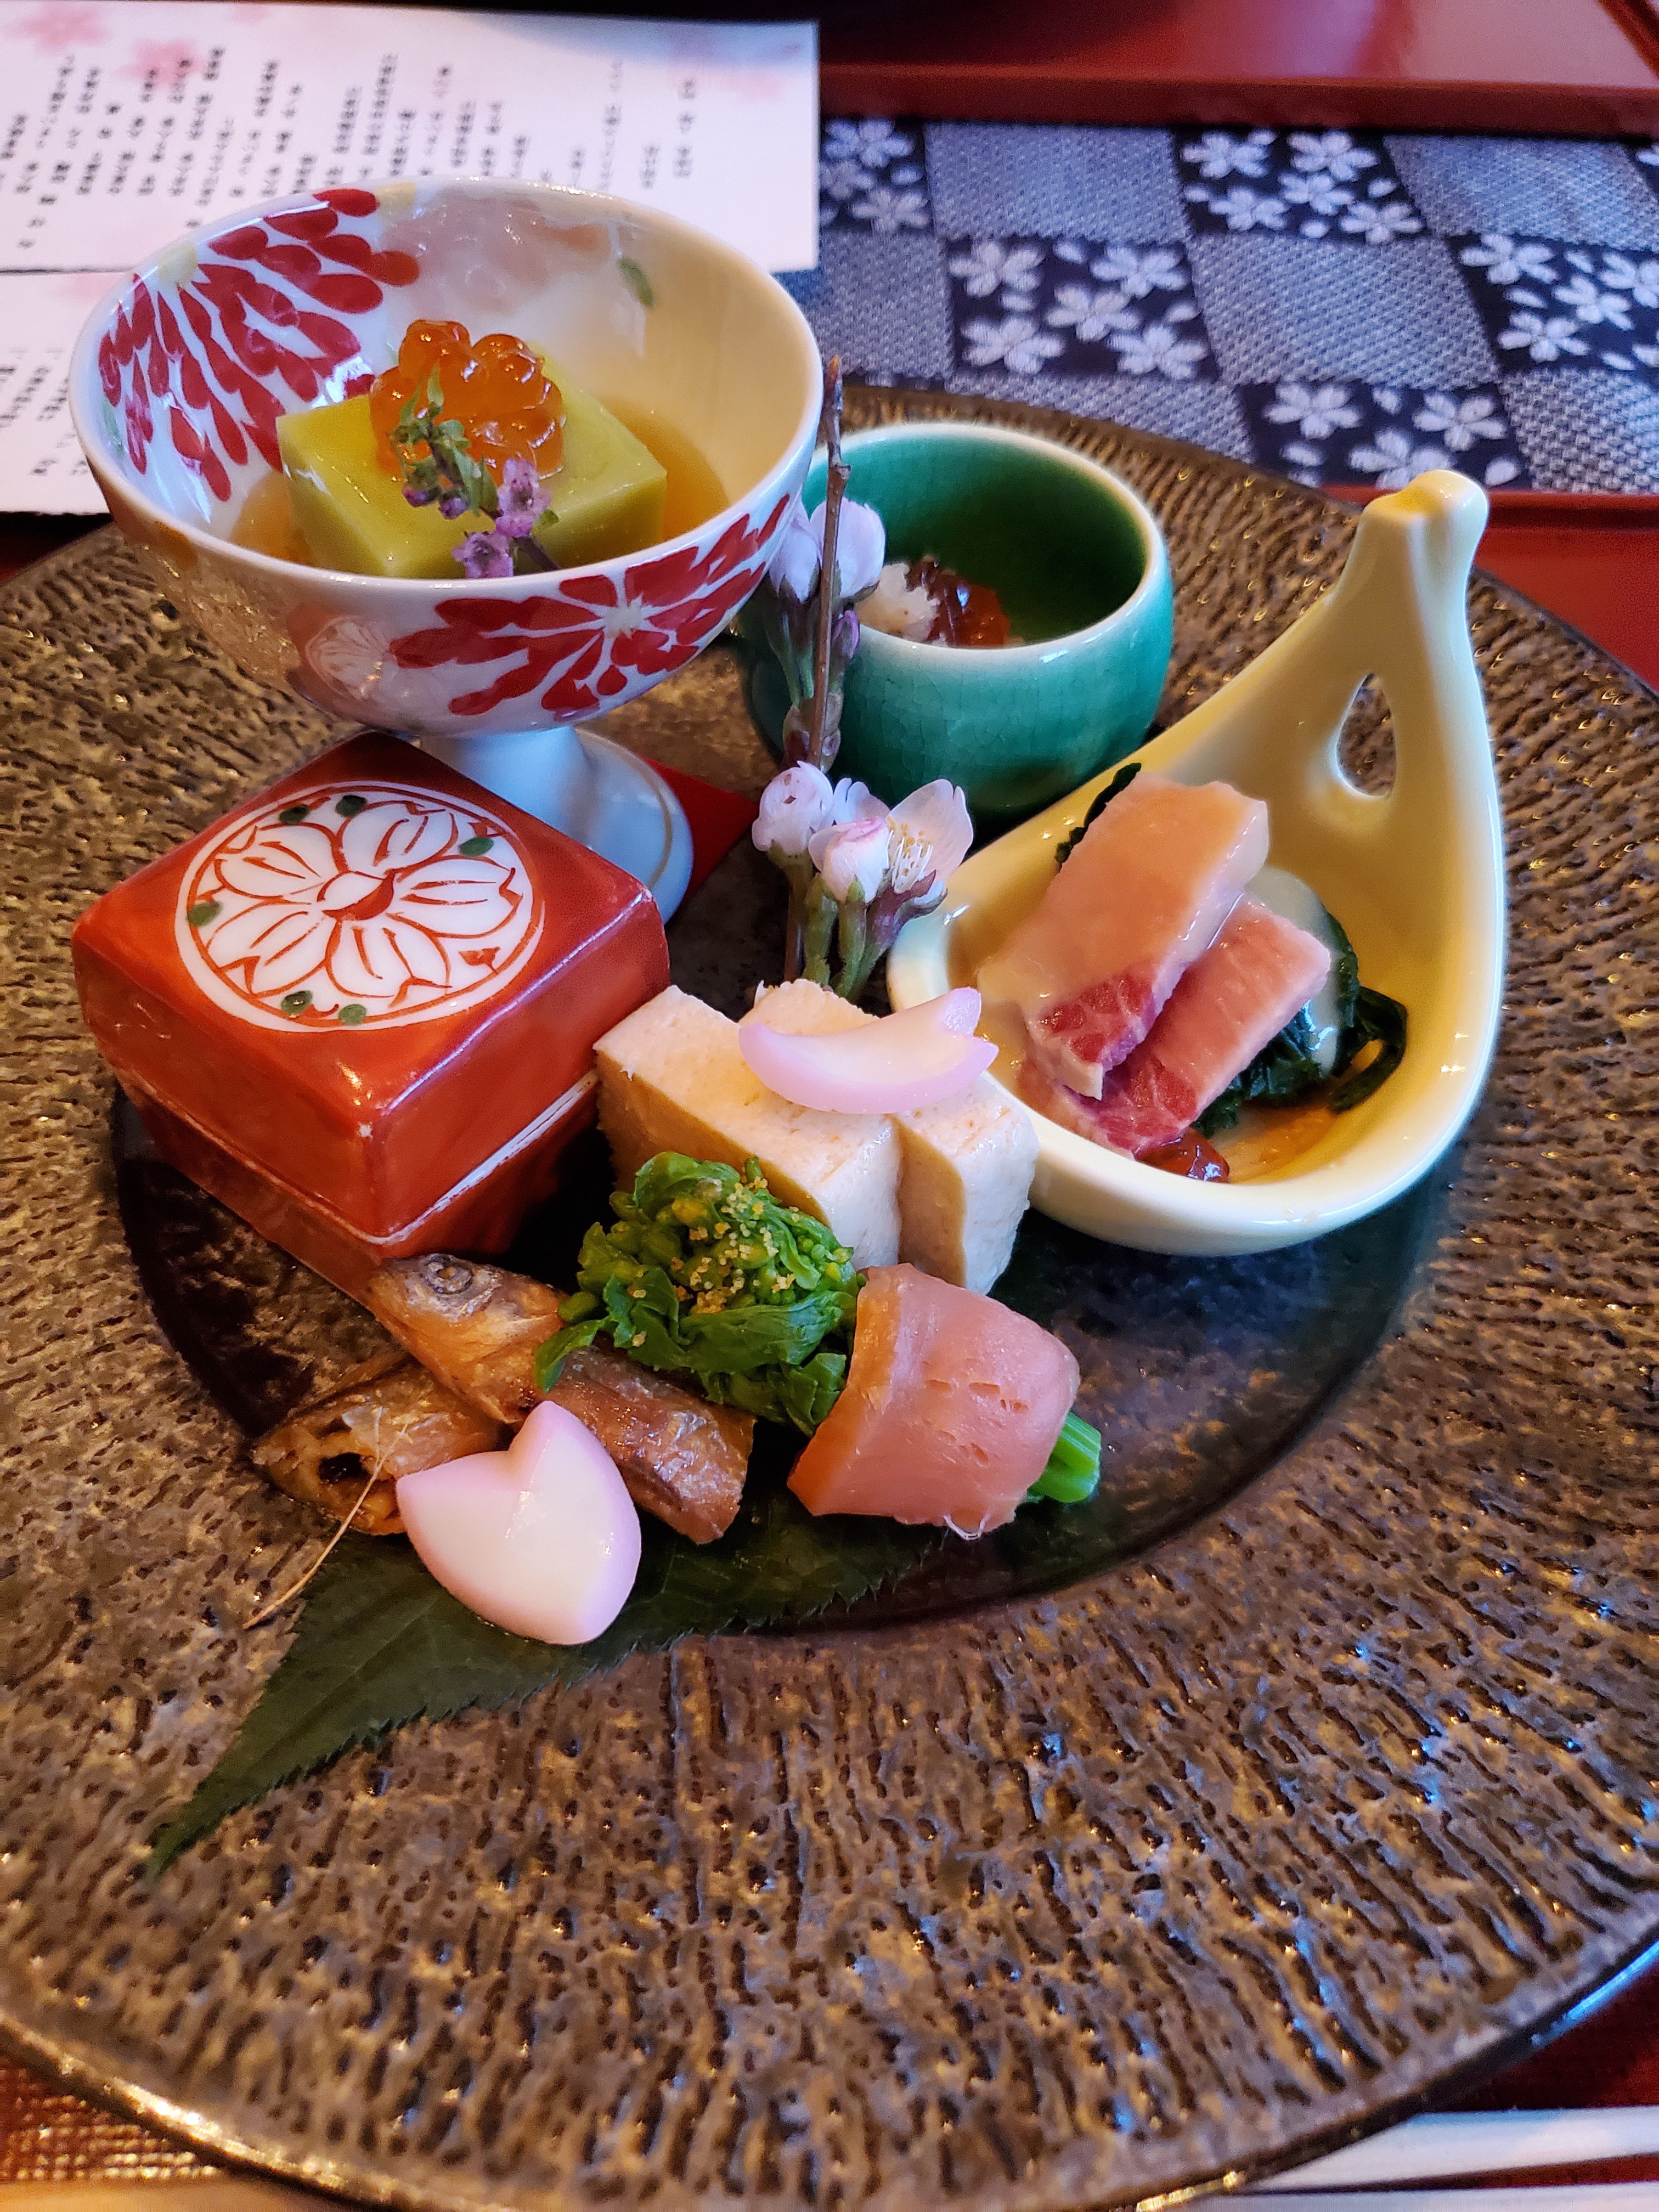 One of the many! courses of our kaiseki meal in Osaka, in my ultimate japan travel guide